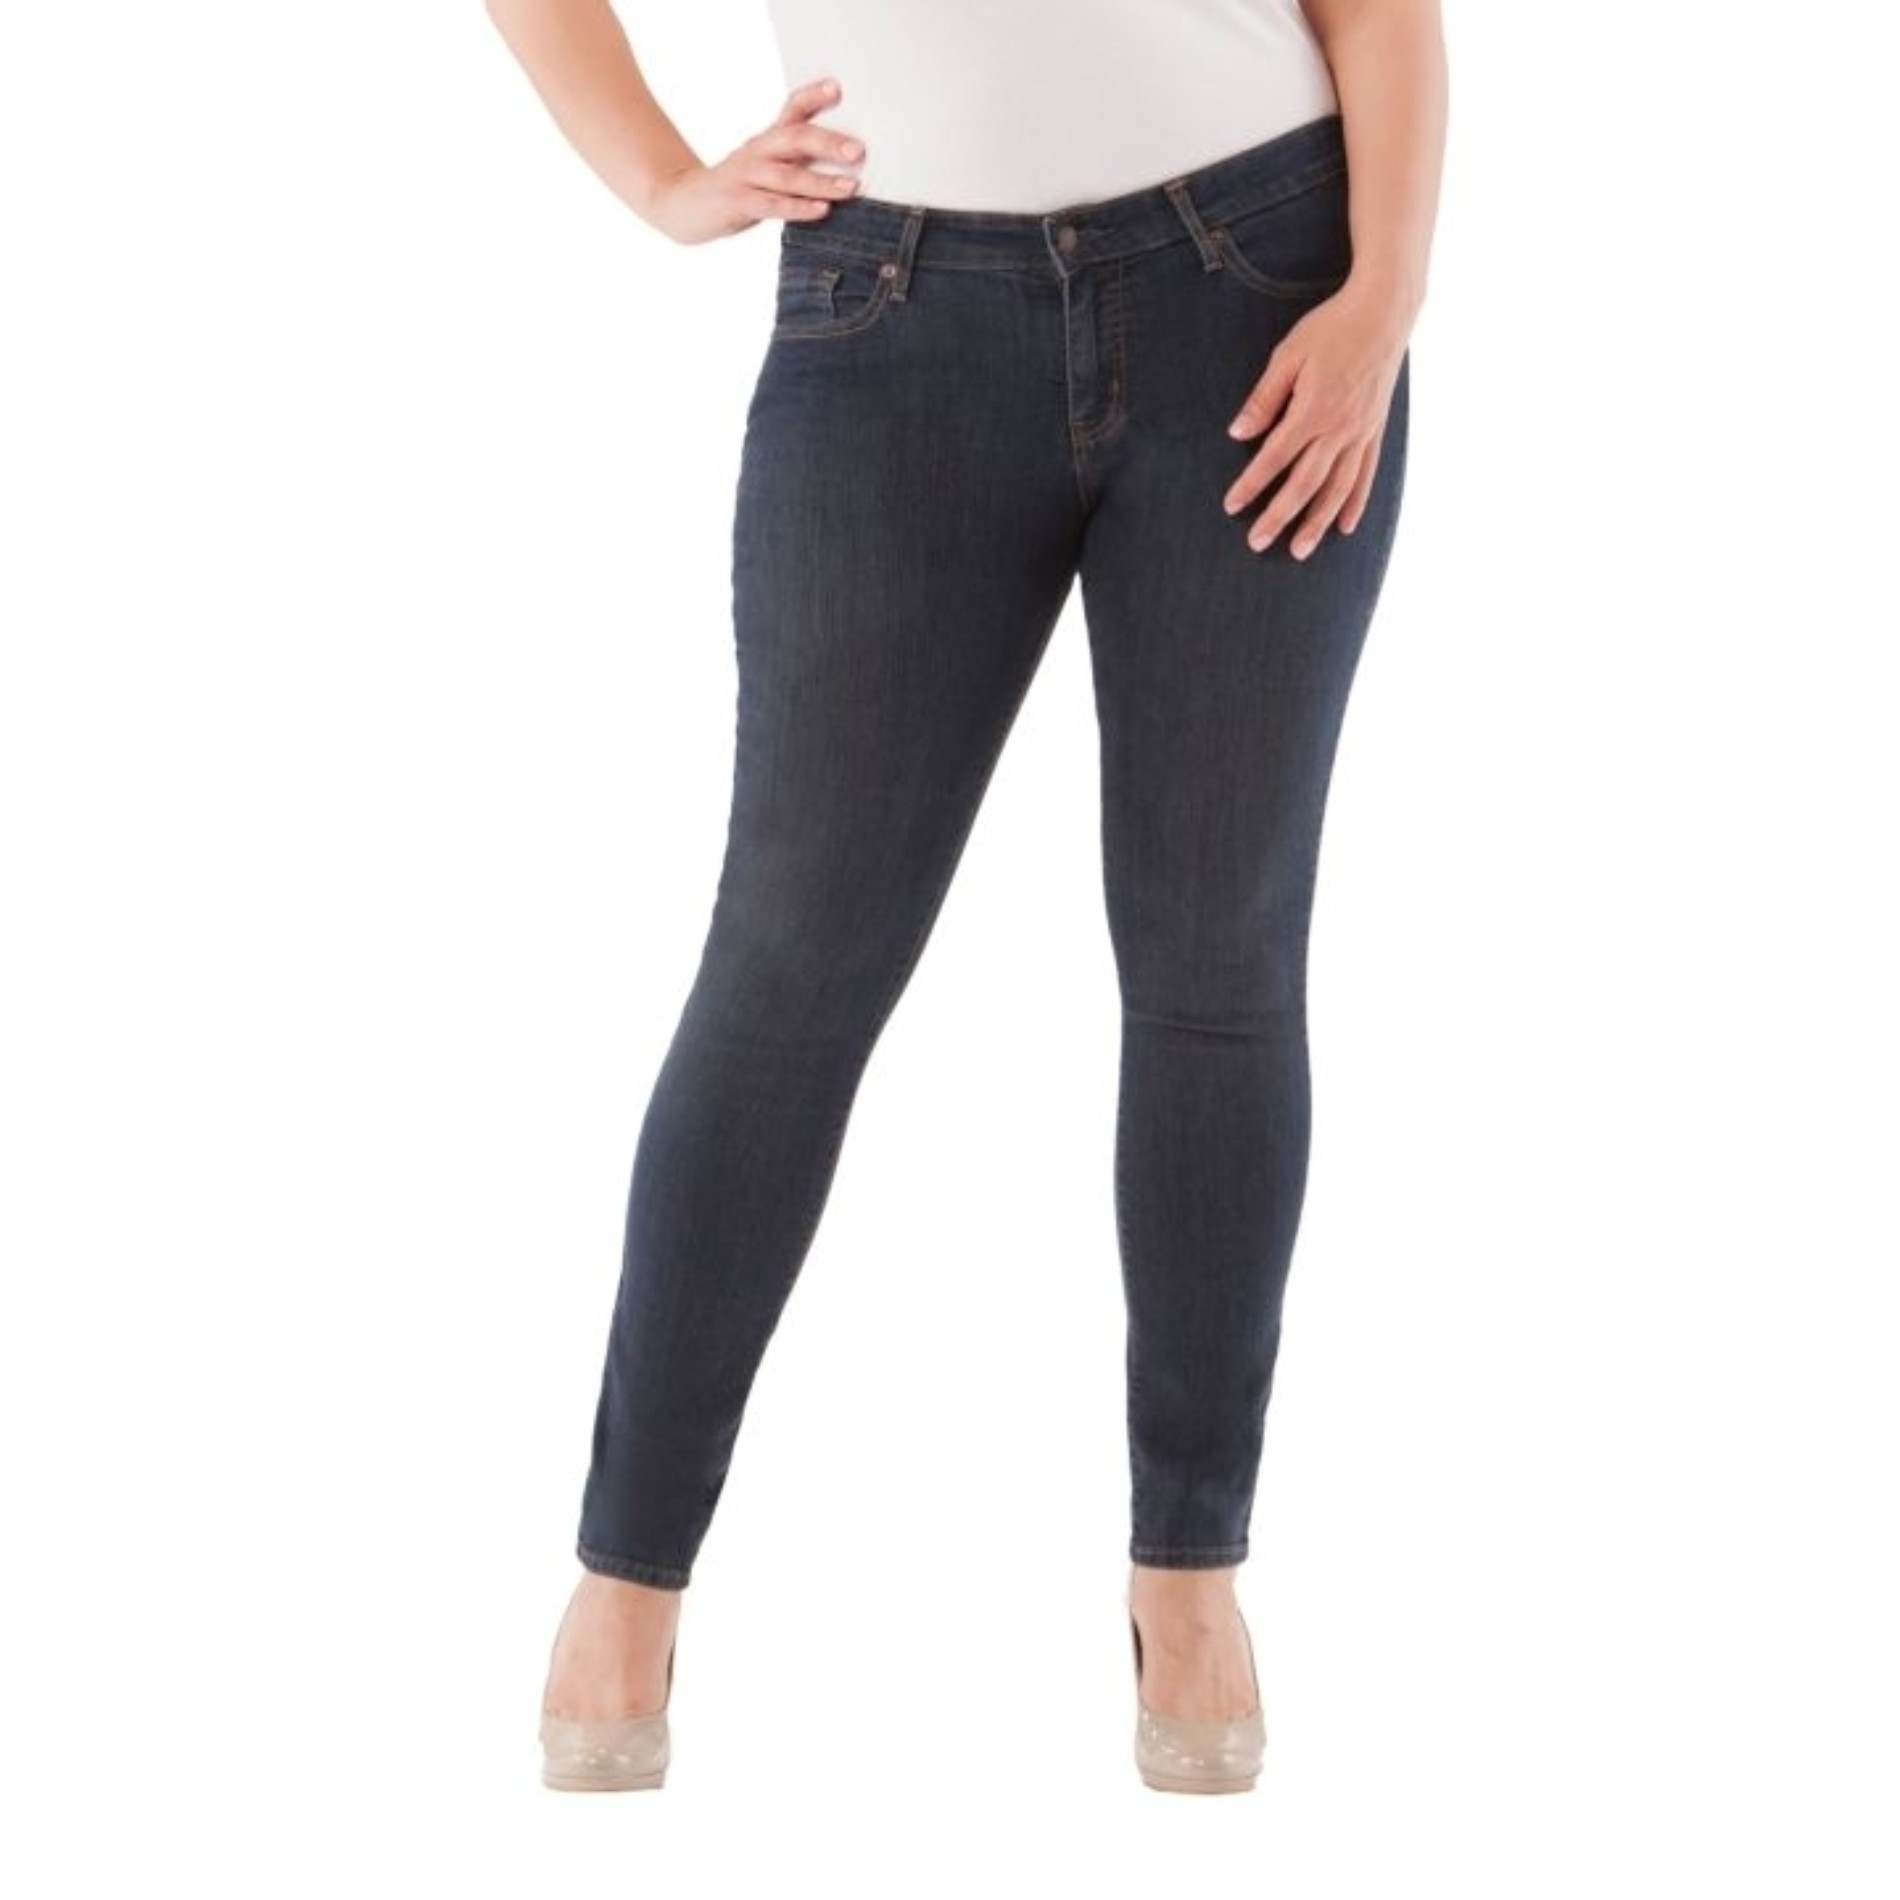 Signature by Levi Strauss & Co. Women's Plus Skinny Jeans